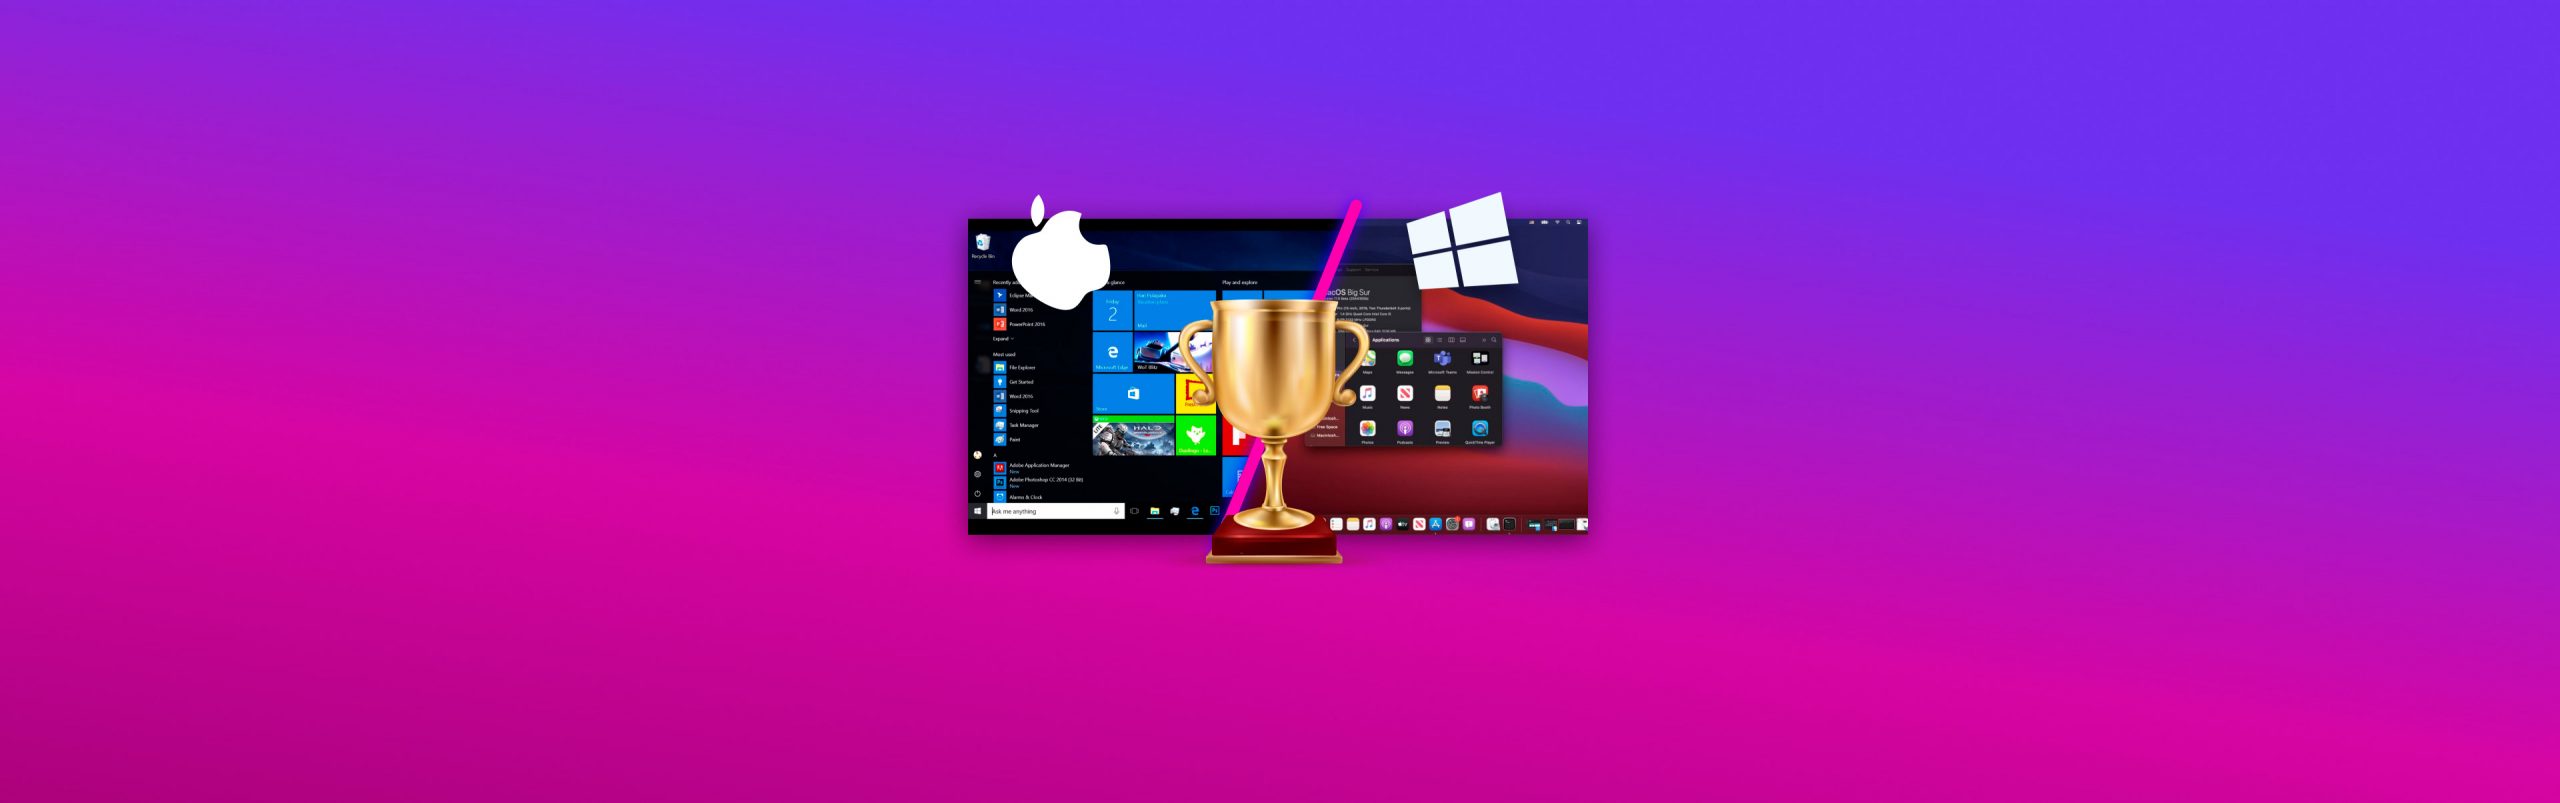 what is the best windows emulator for mac